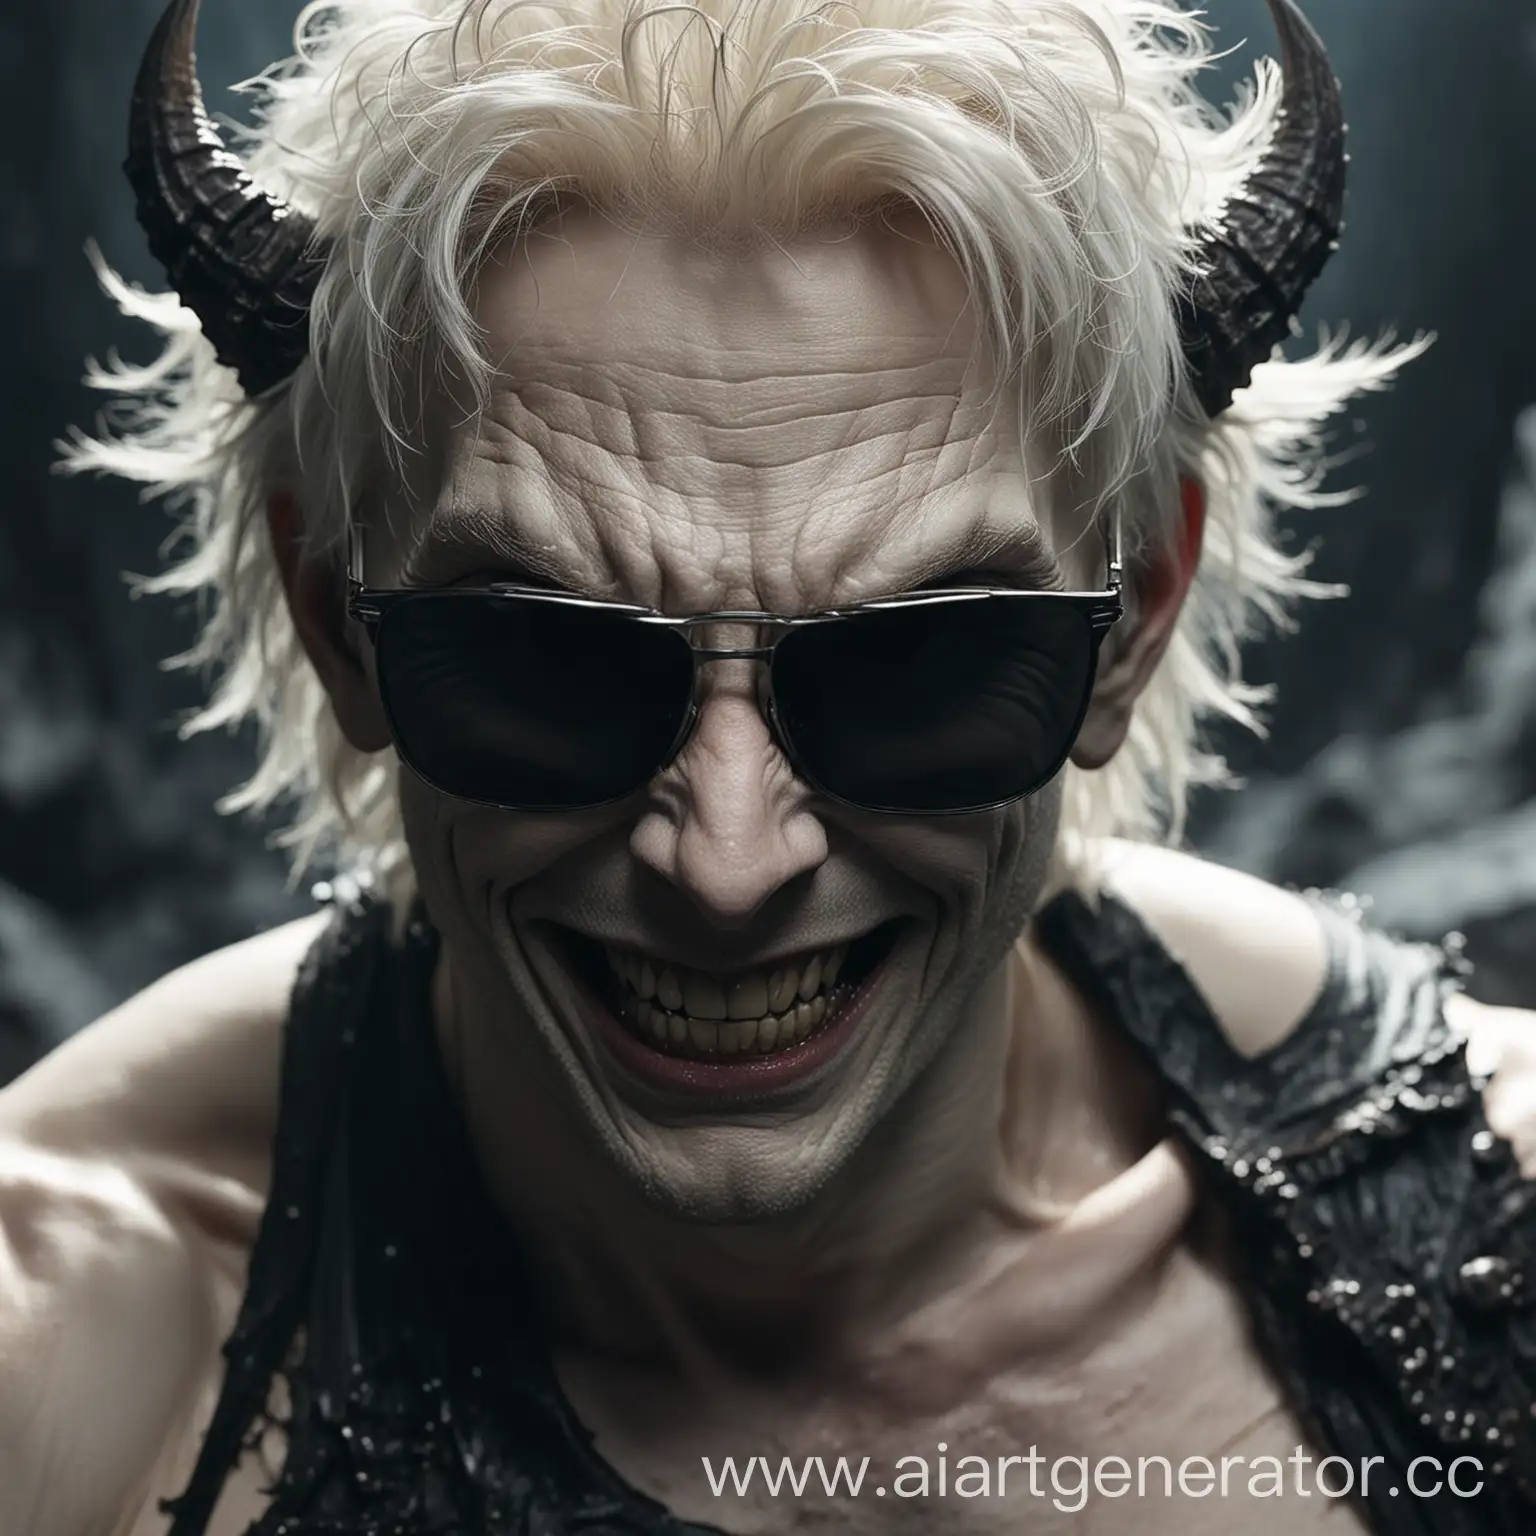 CloseUp-Pale-Demon-Face-with-Smiling-Expression-and-Sunglasses-Against-Abyss-Background